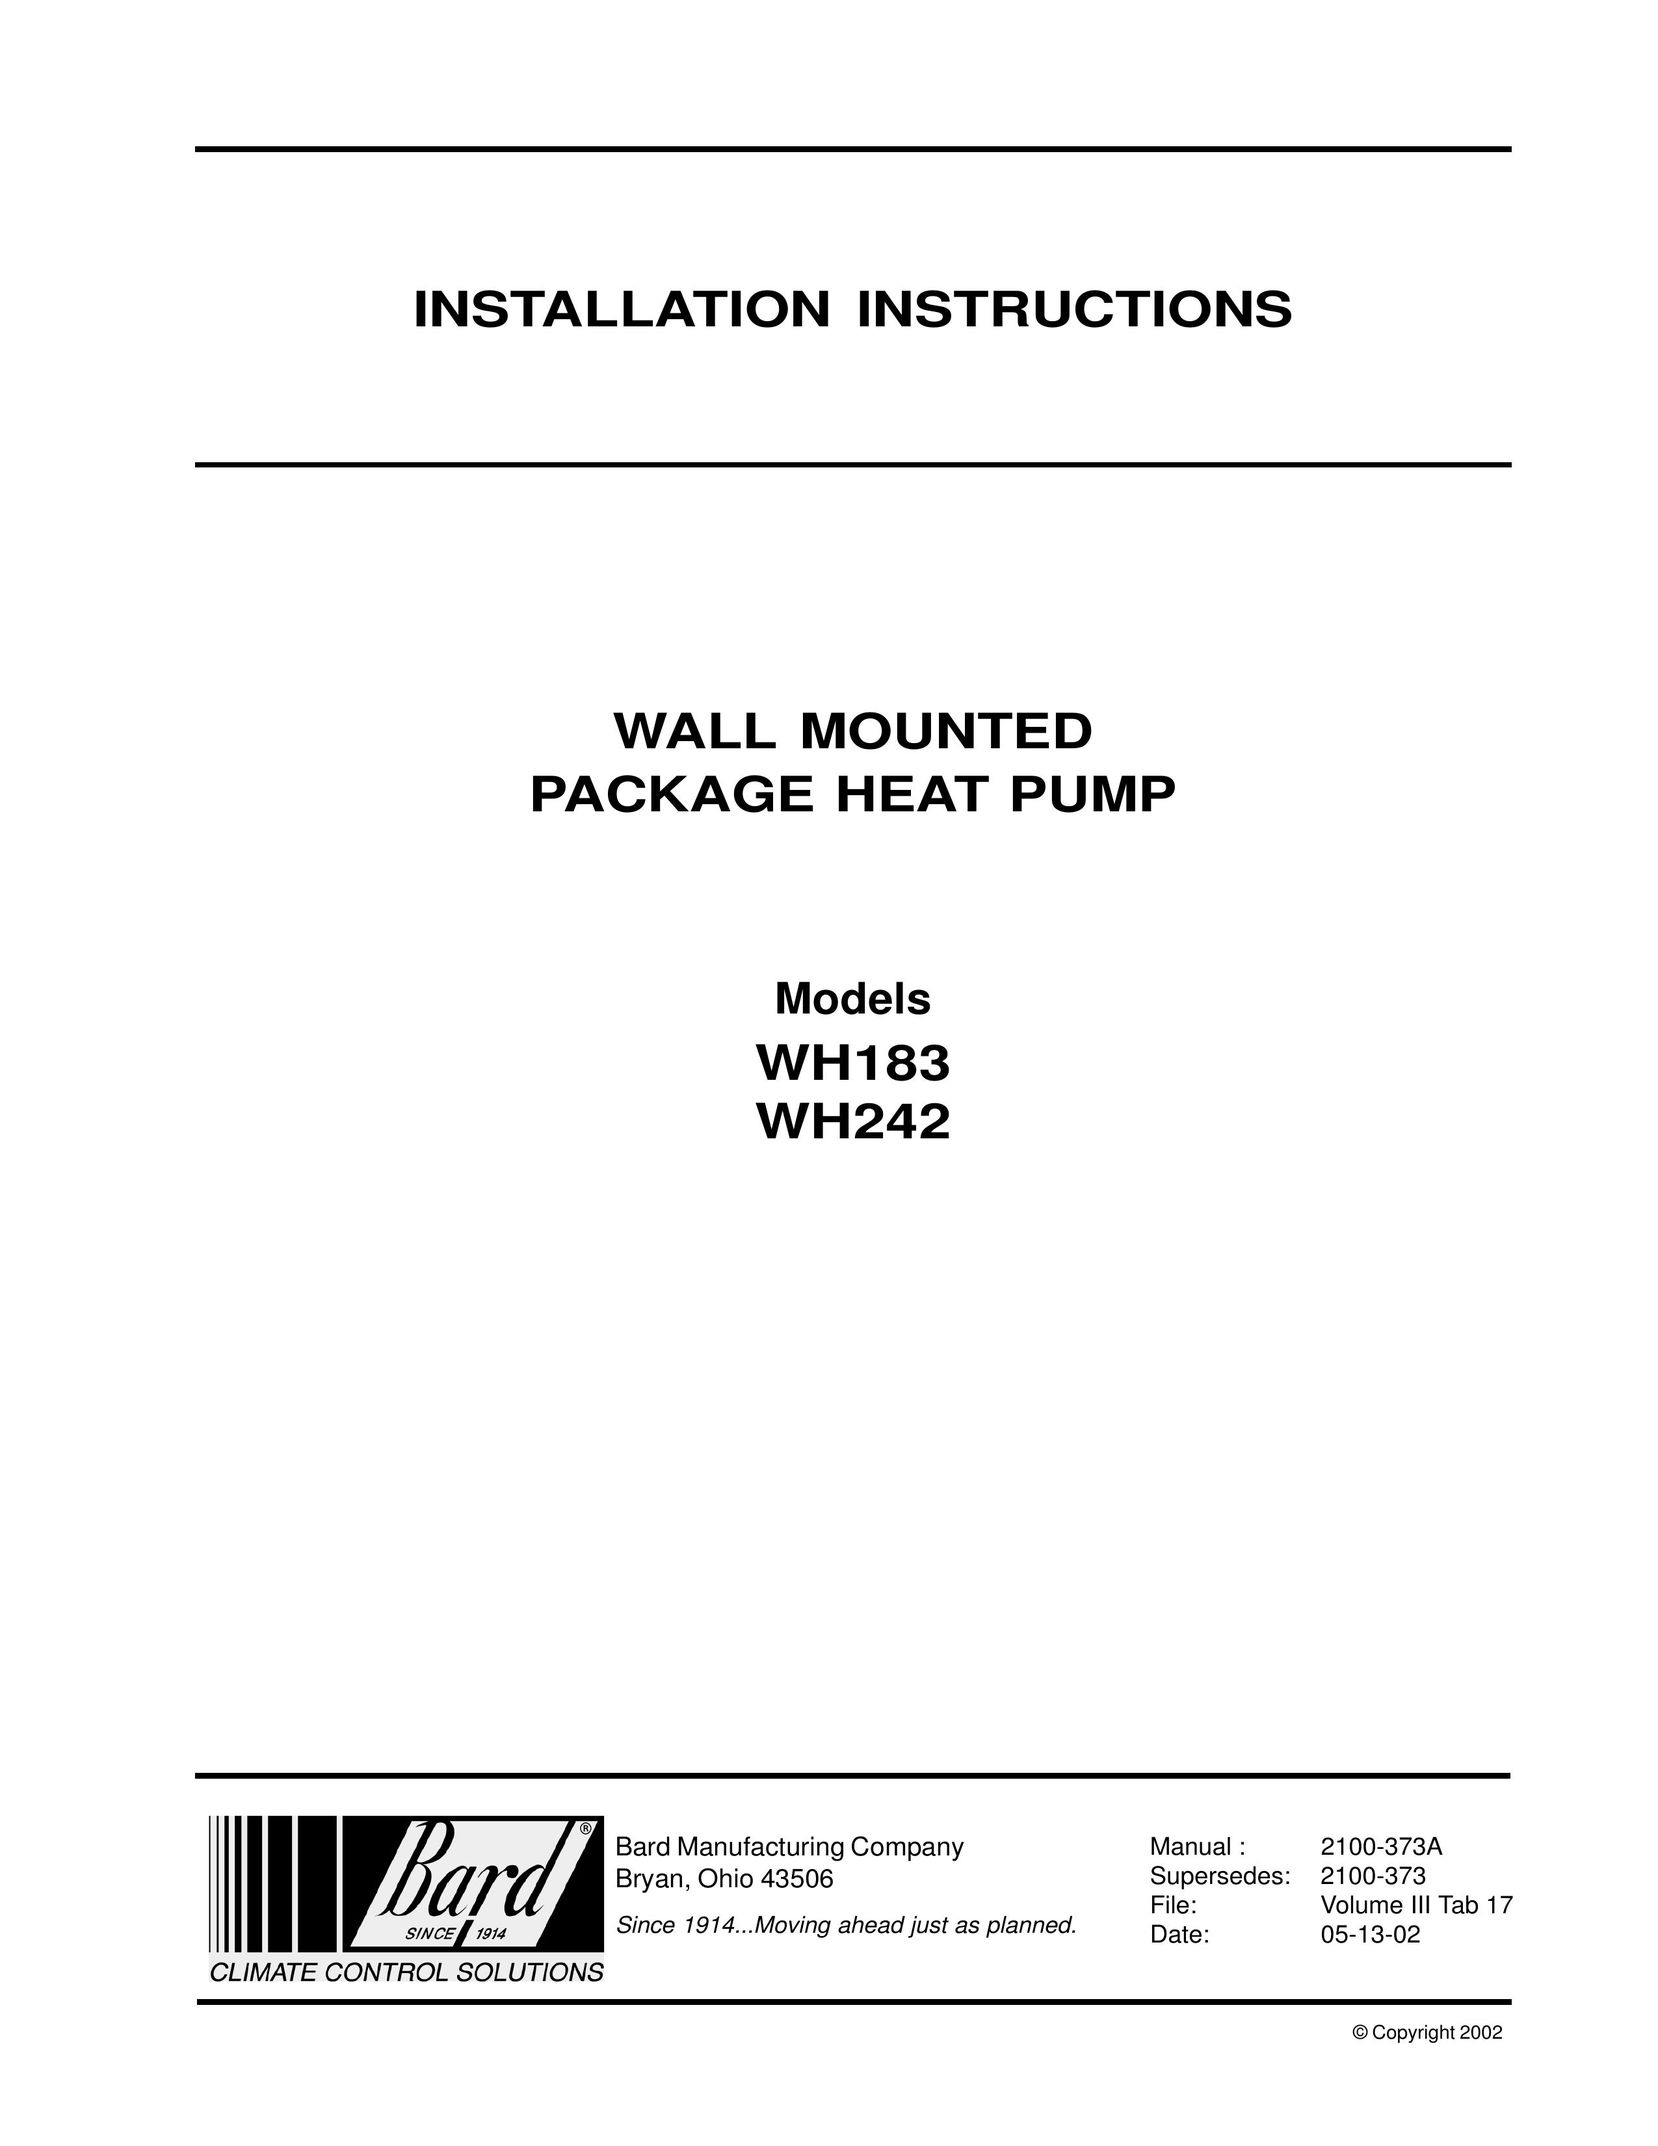 Bard WH242 Electric Heater User Manual